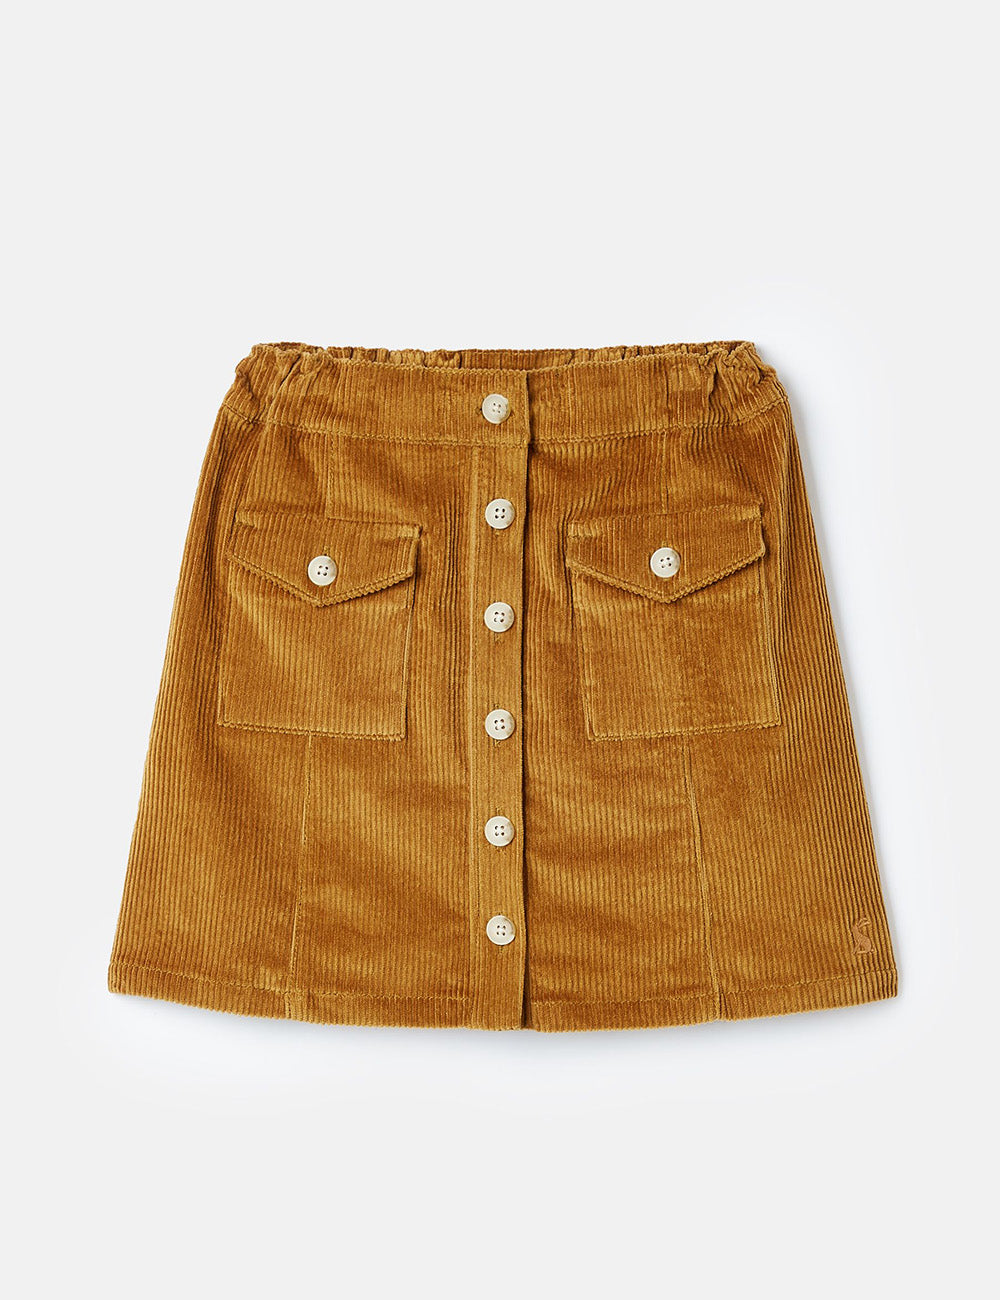 Joules Victoria Cord Skirt - Tan Brown